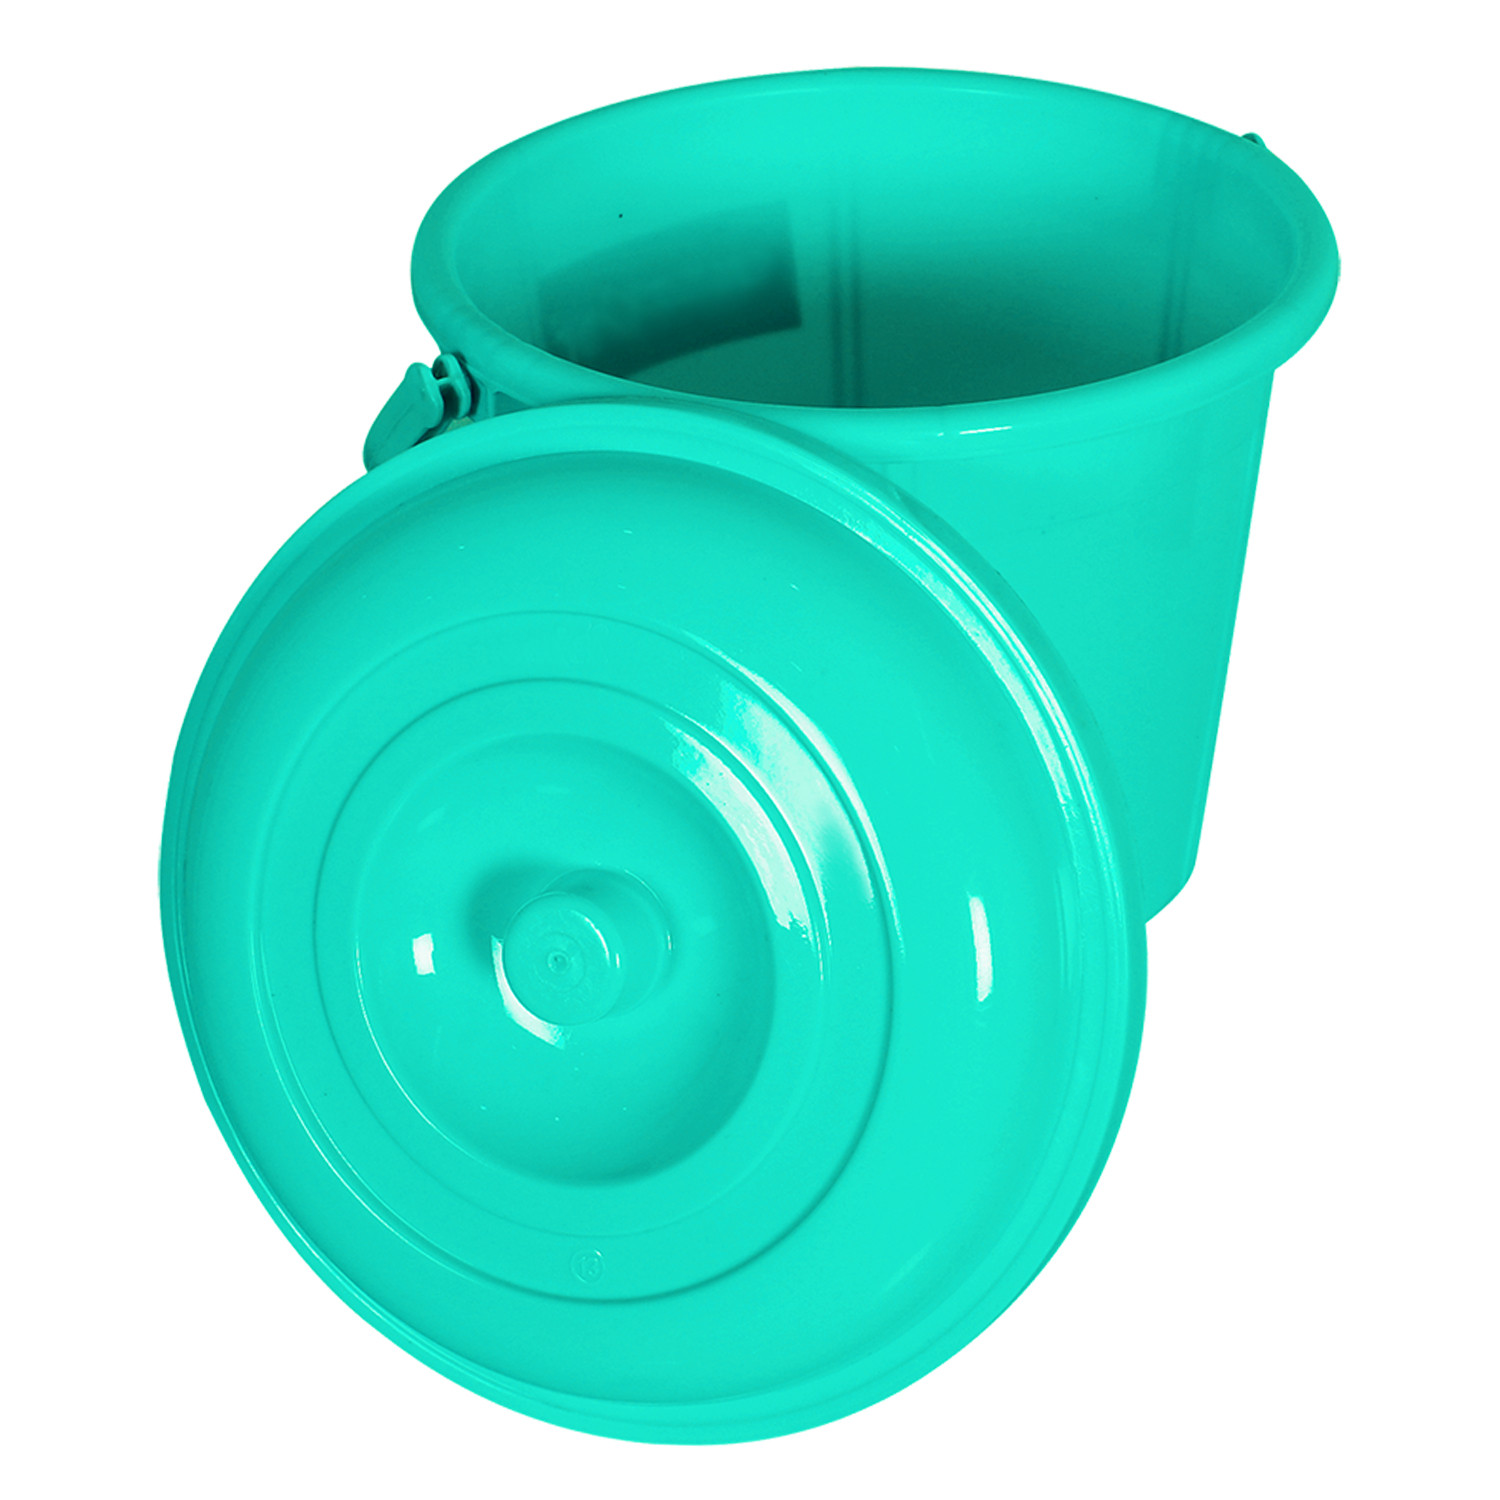 Kuber Industries Unbreakable Plastic Durable & Lightweight Strong Bathroom Bucket With Lid And Handle,13 Ltr. (Mint Green)